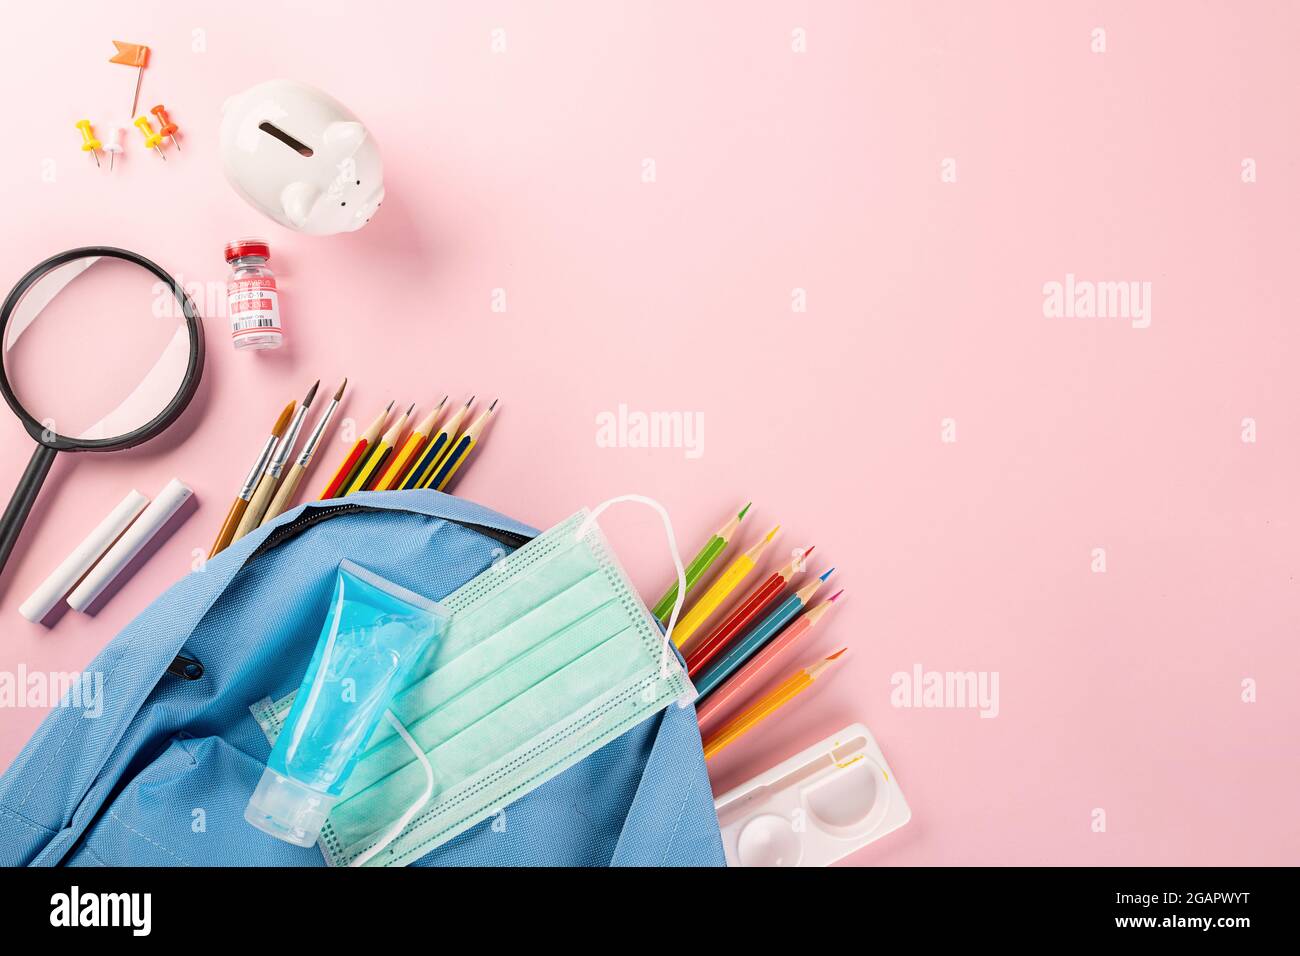 Lay with Pink School Supplies Isolated Stock Image - Image of